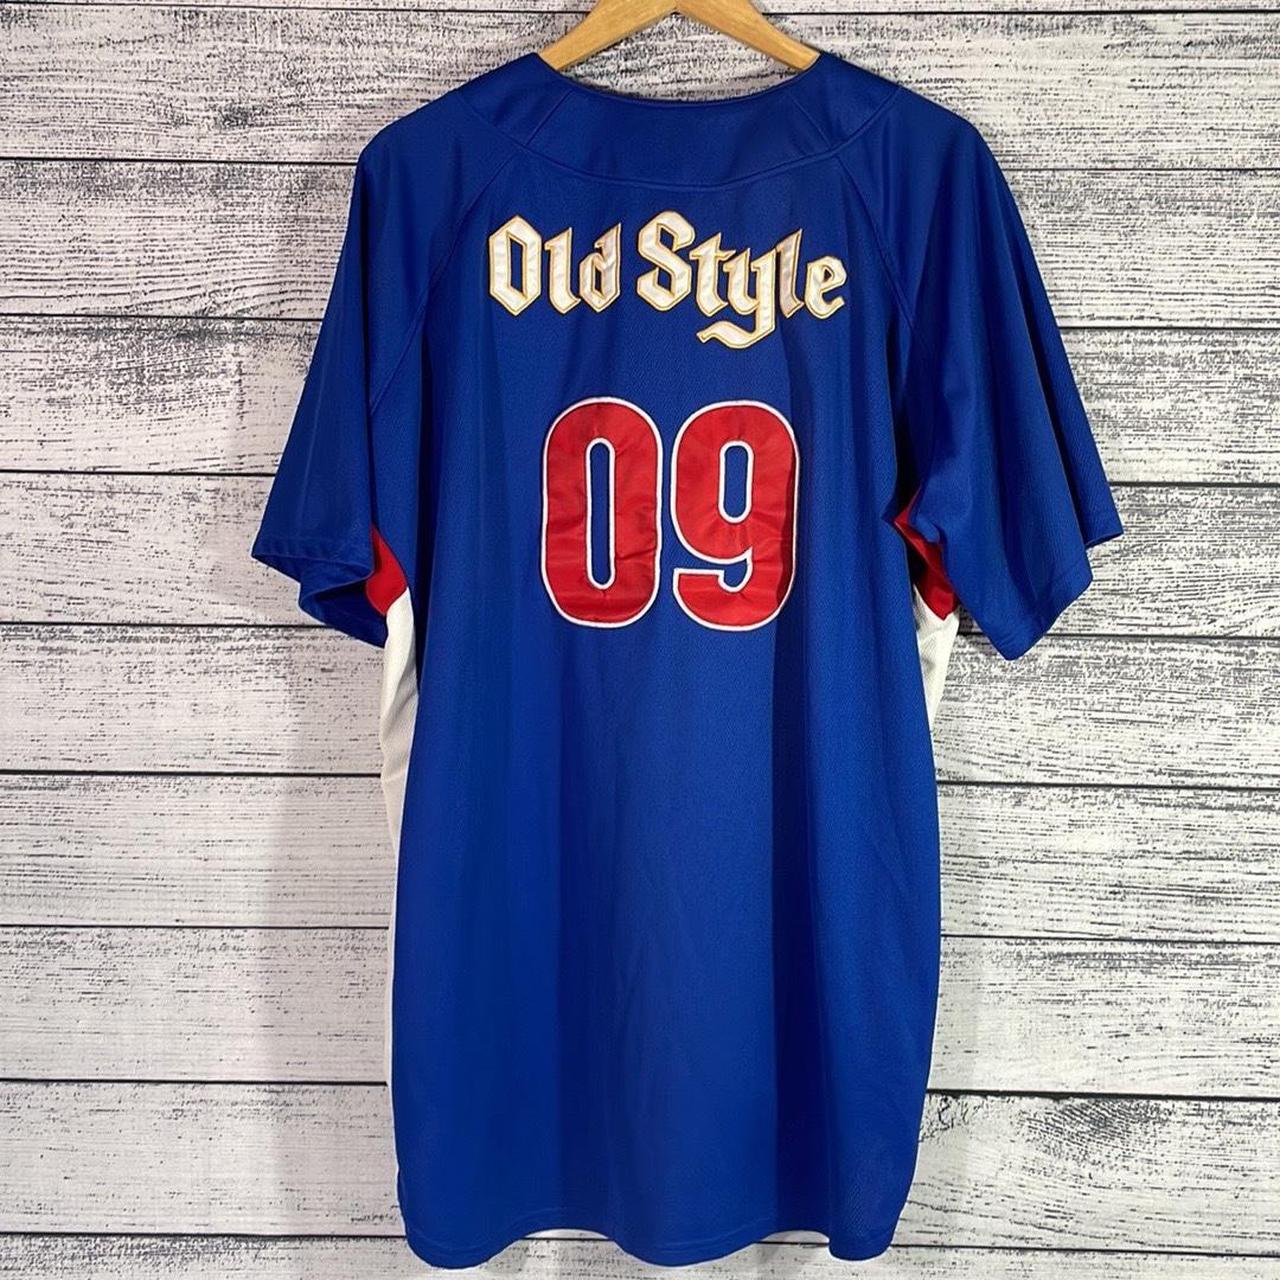 MLB, Shirts, Vintage Chicago Cubs Mlb Blue Old Style Beer Jersey Shirt Xl